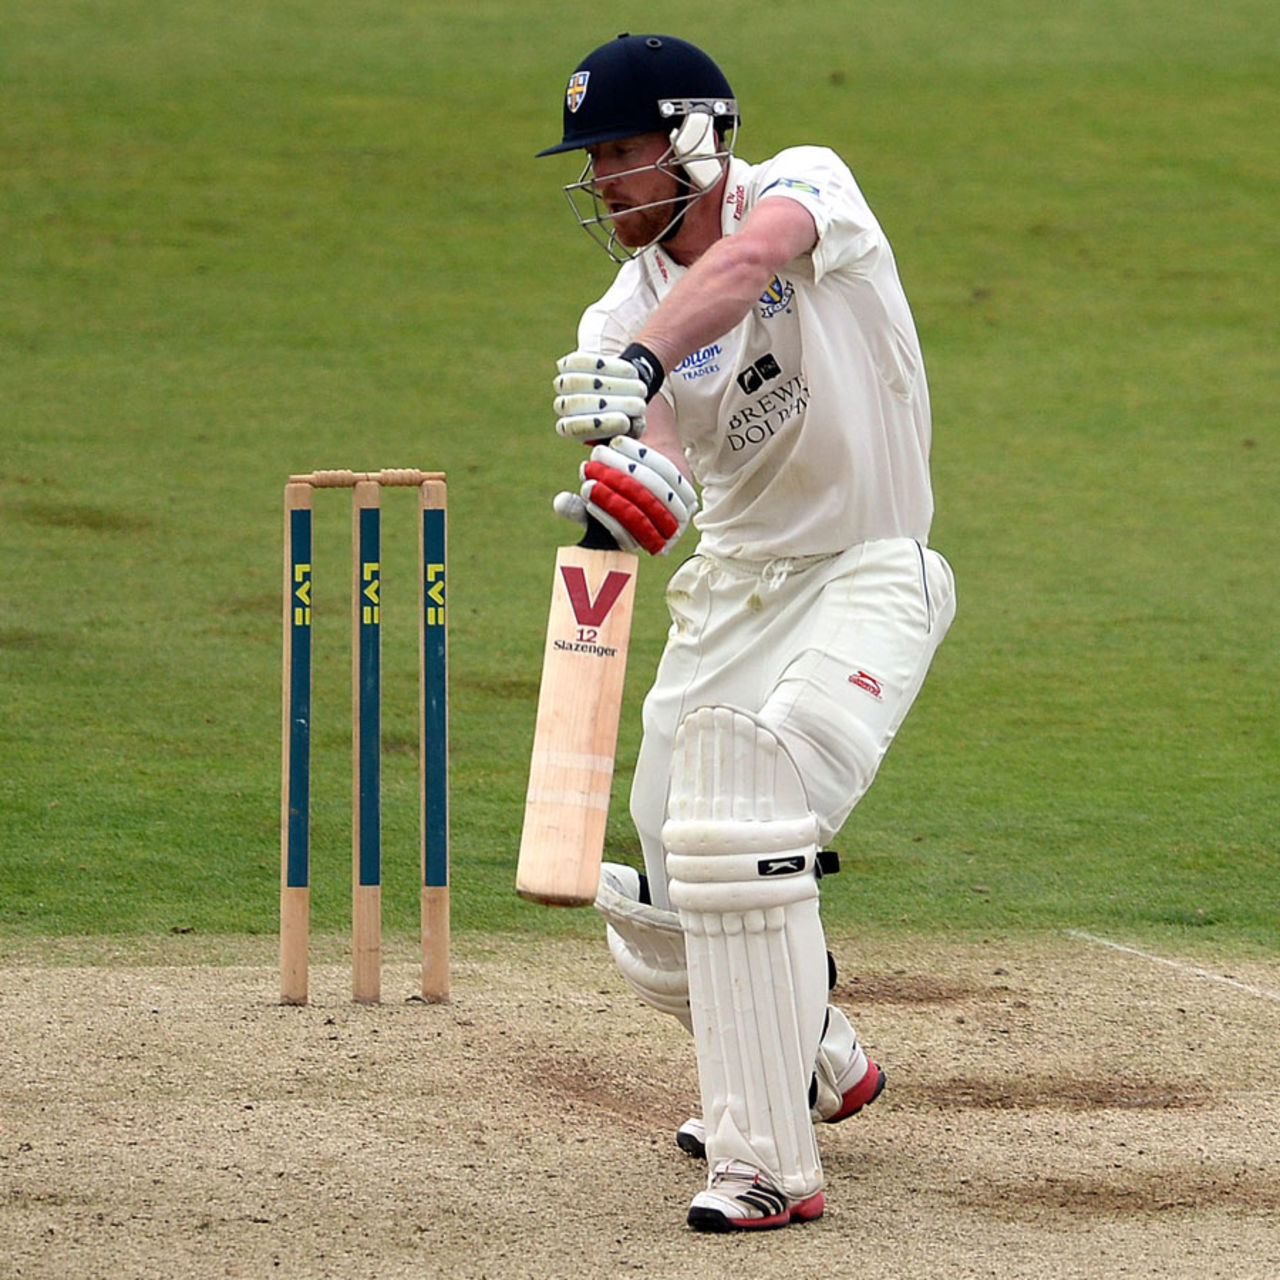 Paul Collingwood dug in after early wickets had fallen, Durham v Nottinghamshire, County Championship, Division One, Chester-le-Street, 1st day, September 17, 2013